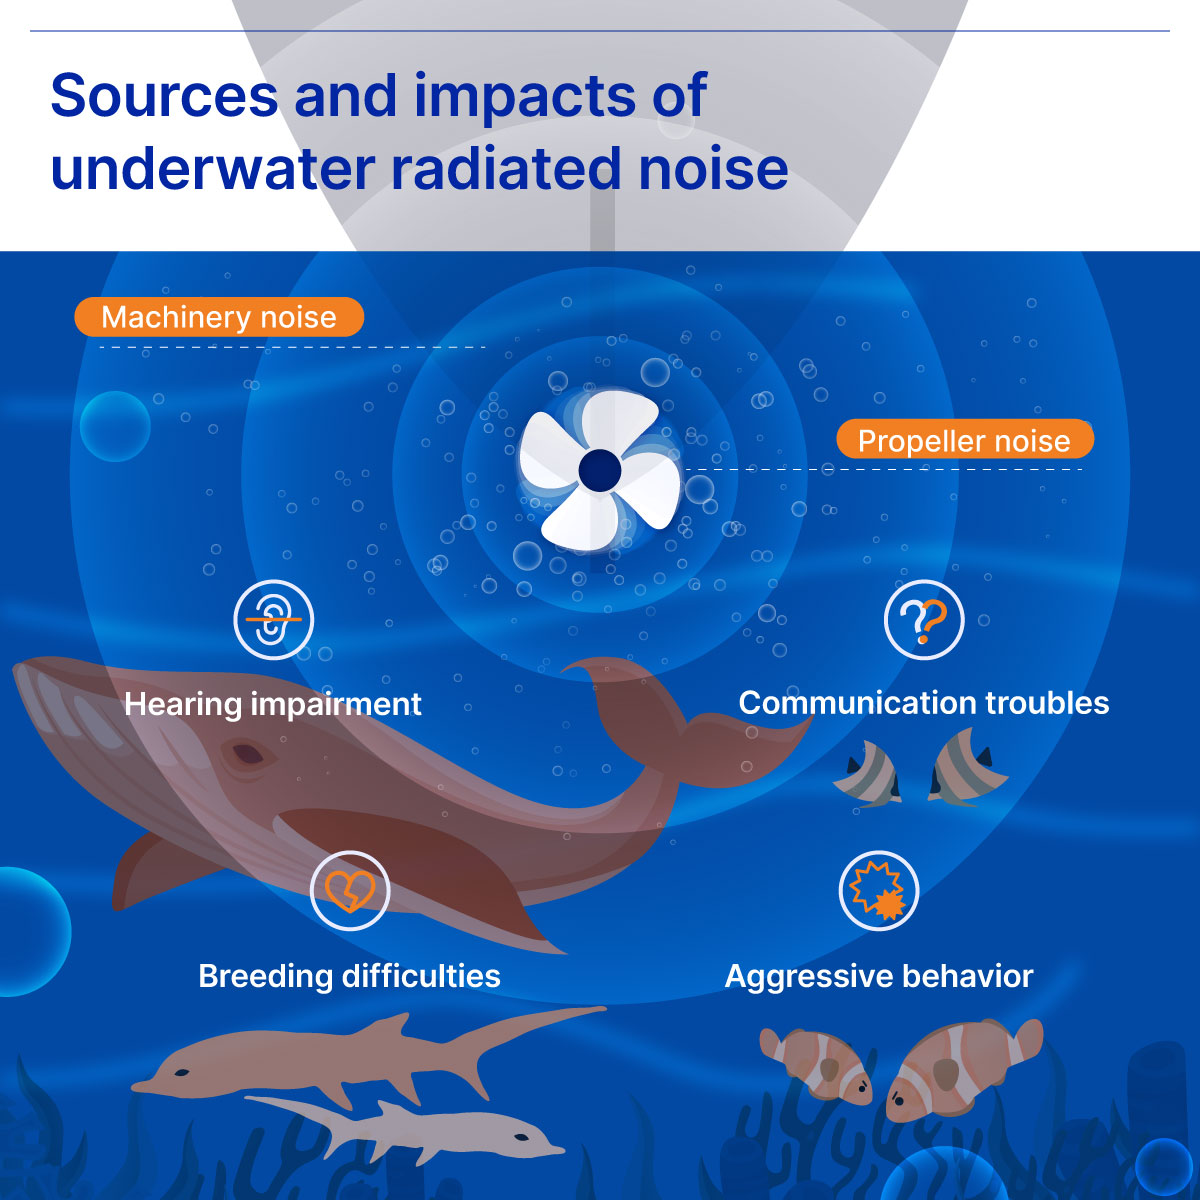 Underwater radiated noise comes from machinery and propellors on ships.